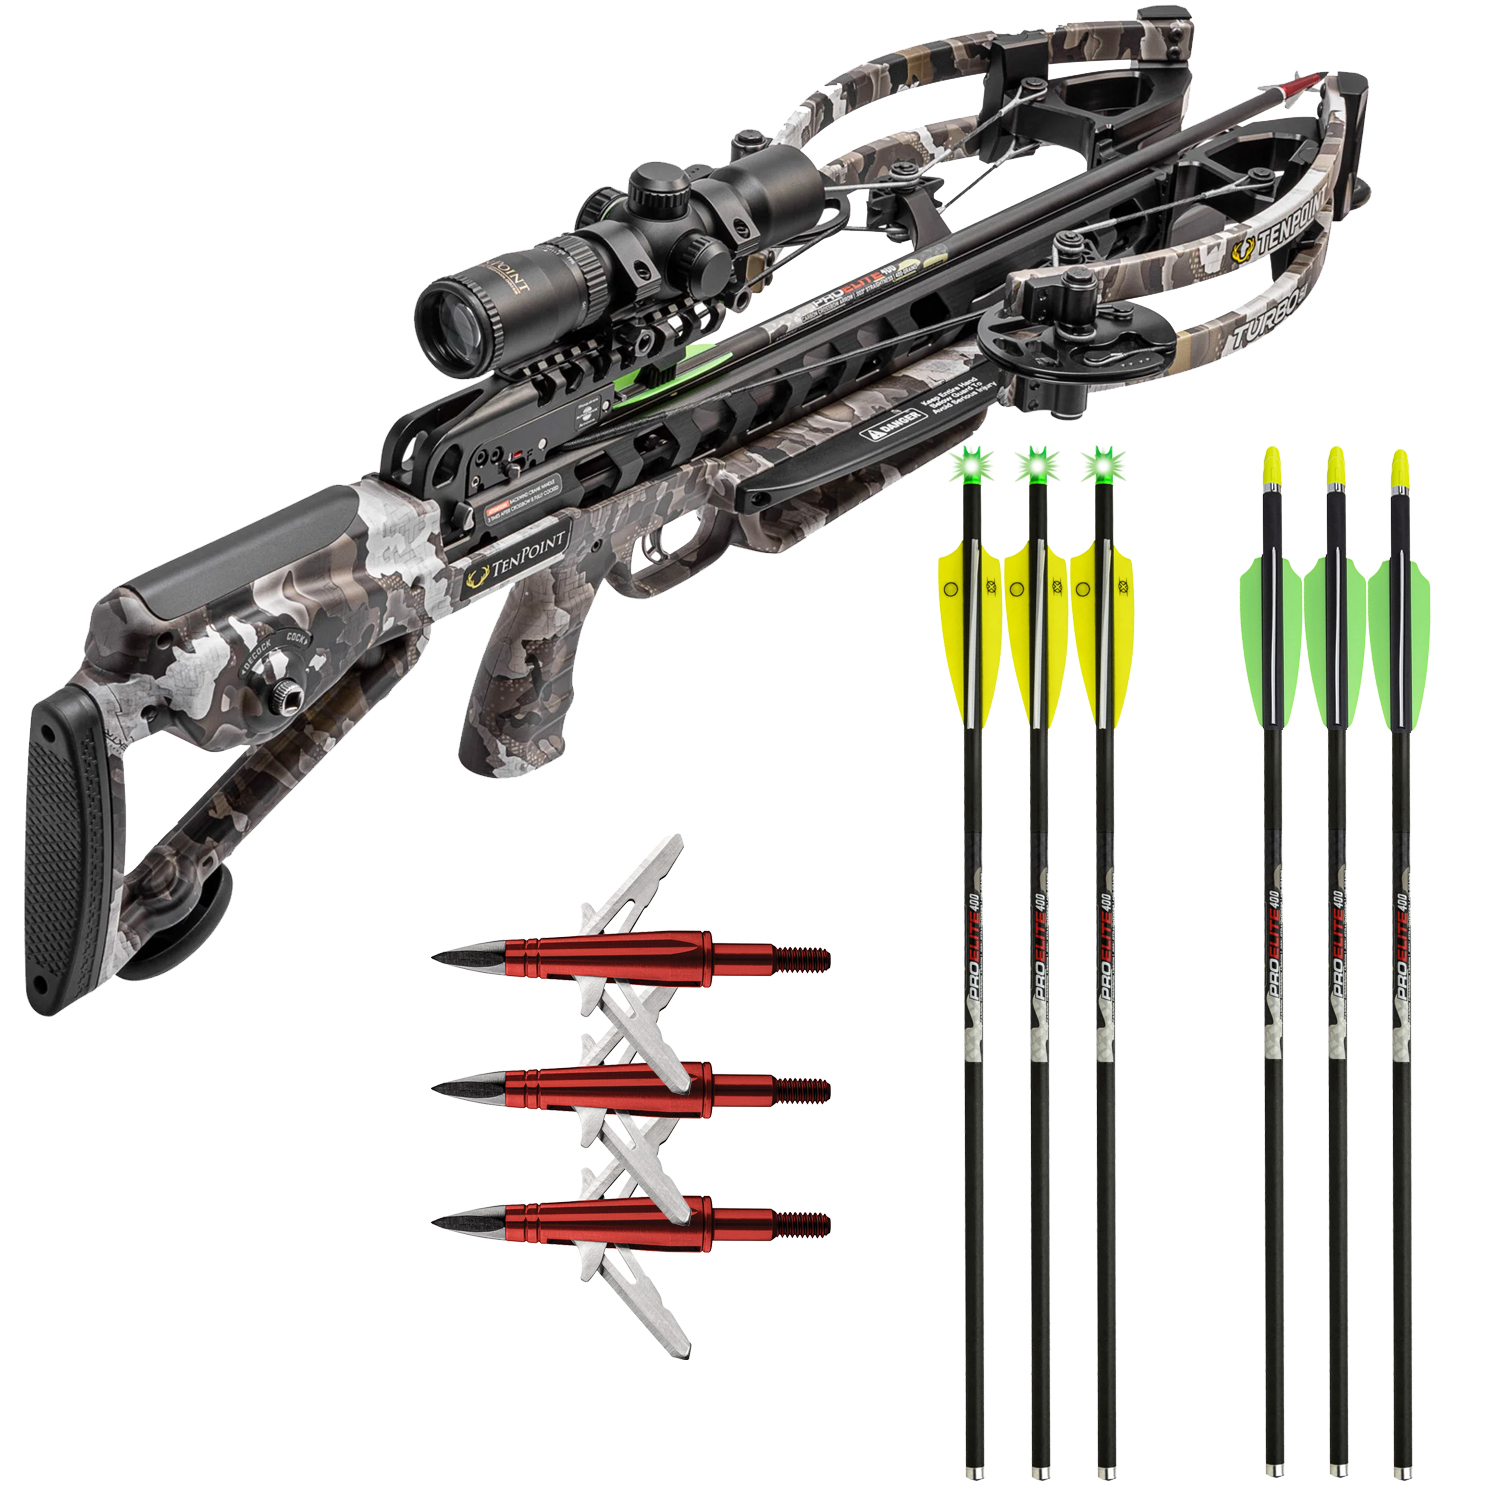 3 Free Arrows and Broadheads! Graphite Grey TenPoint Vapor RS470 Crossbow 